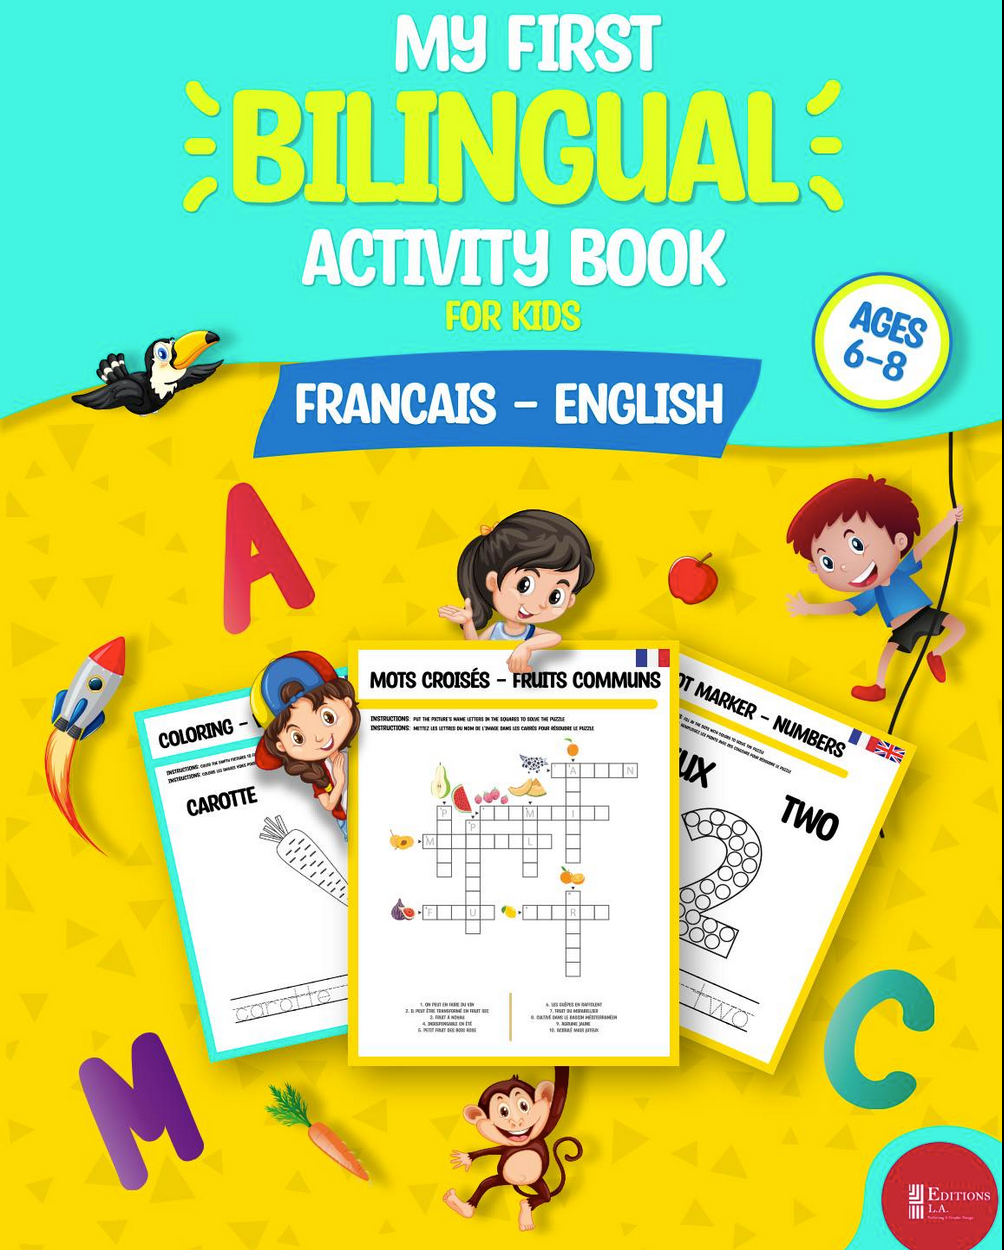 A book called my first bilingual activity book for kids